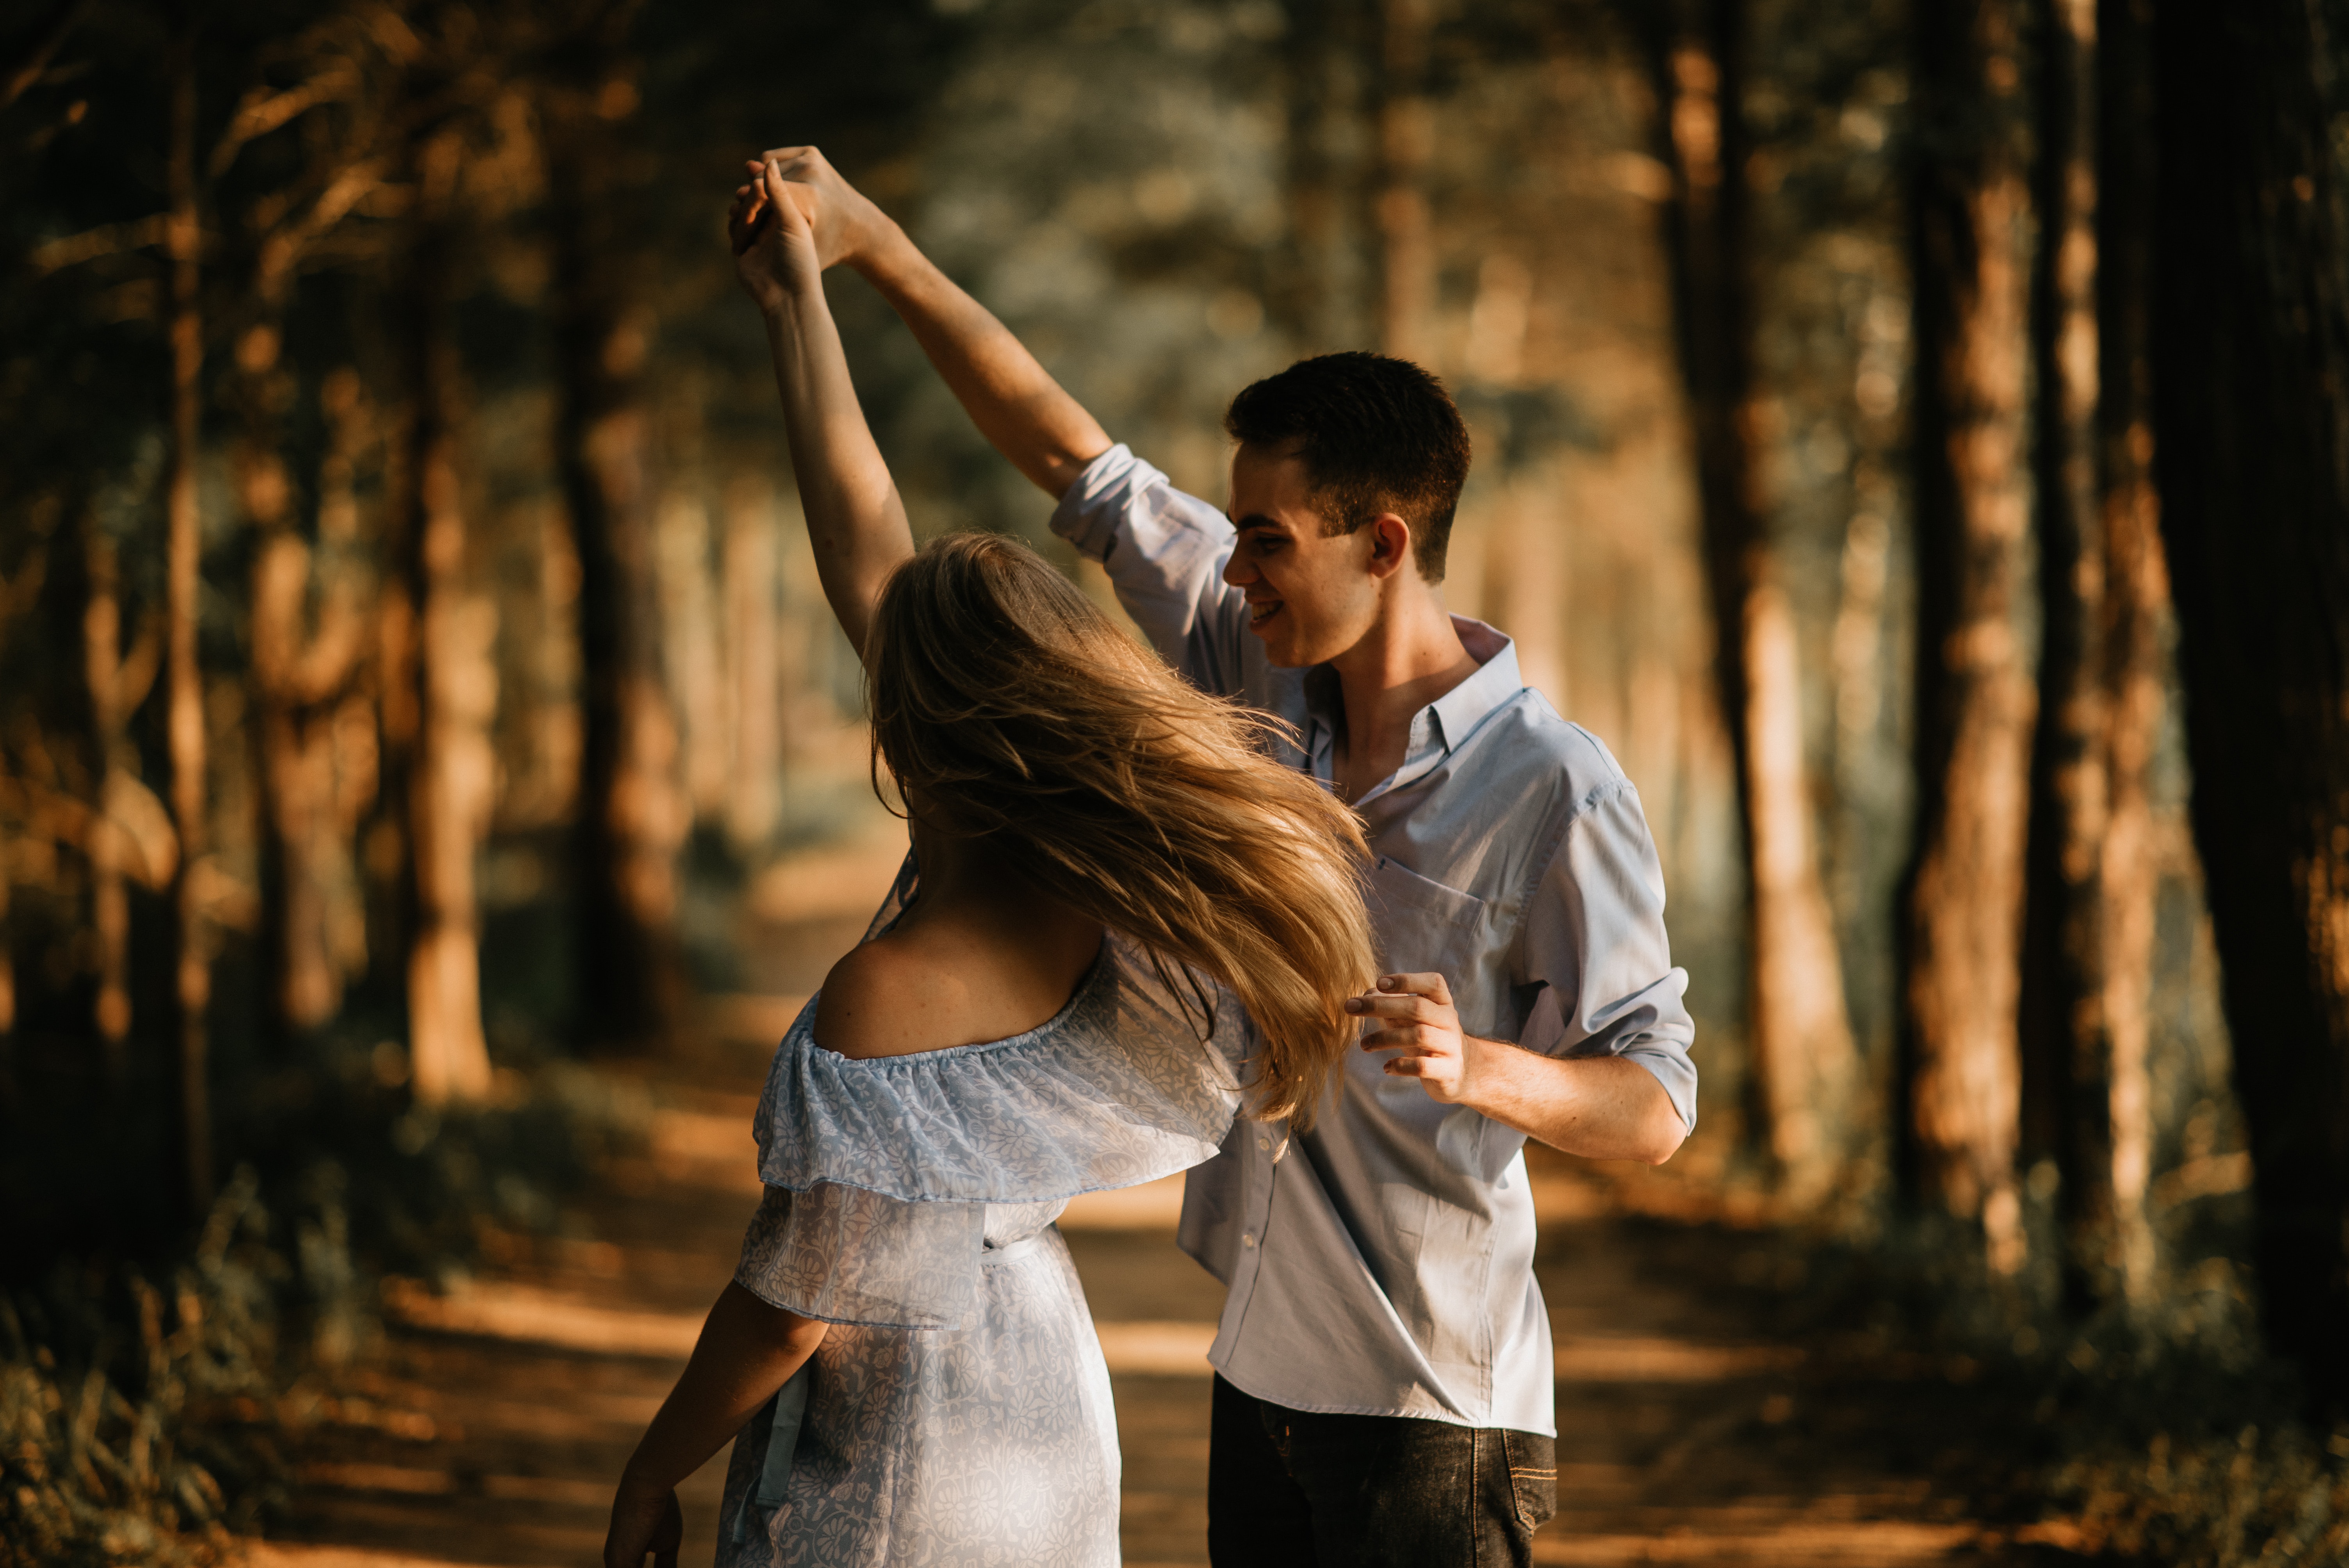 Young couple in the woods. | Source: Unsplash